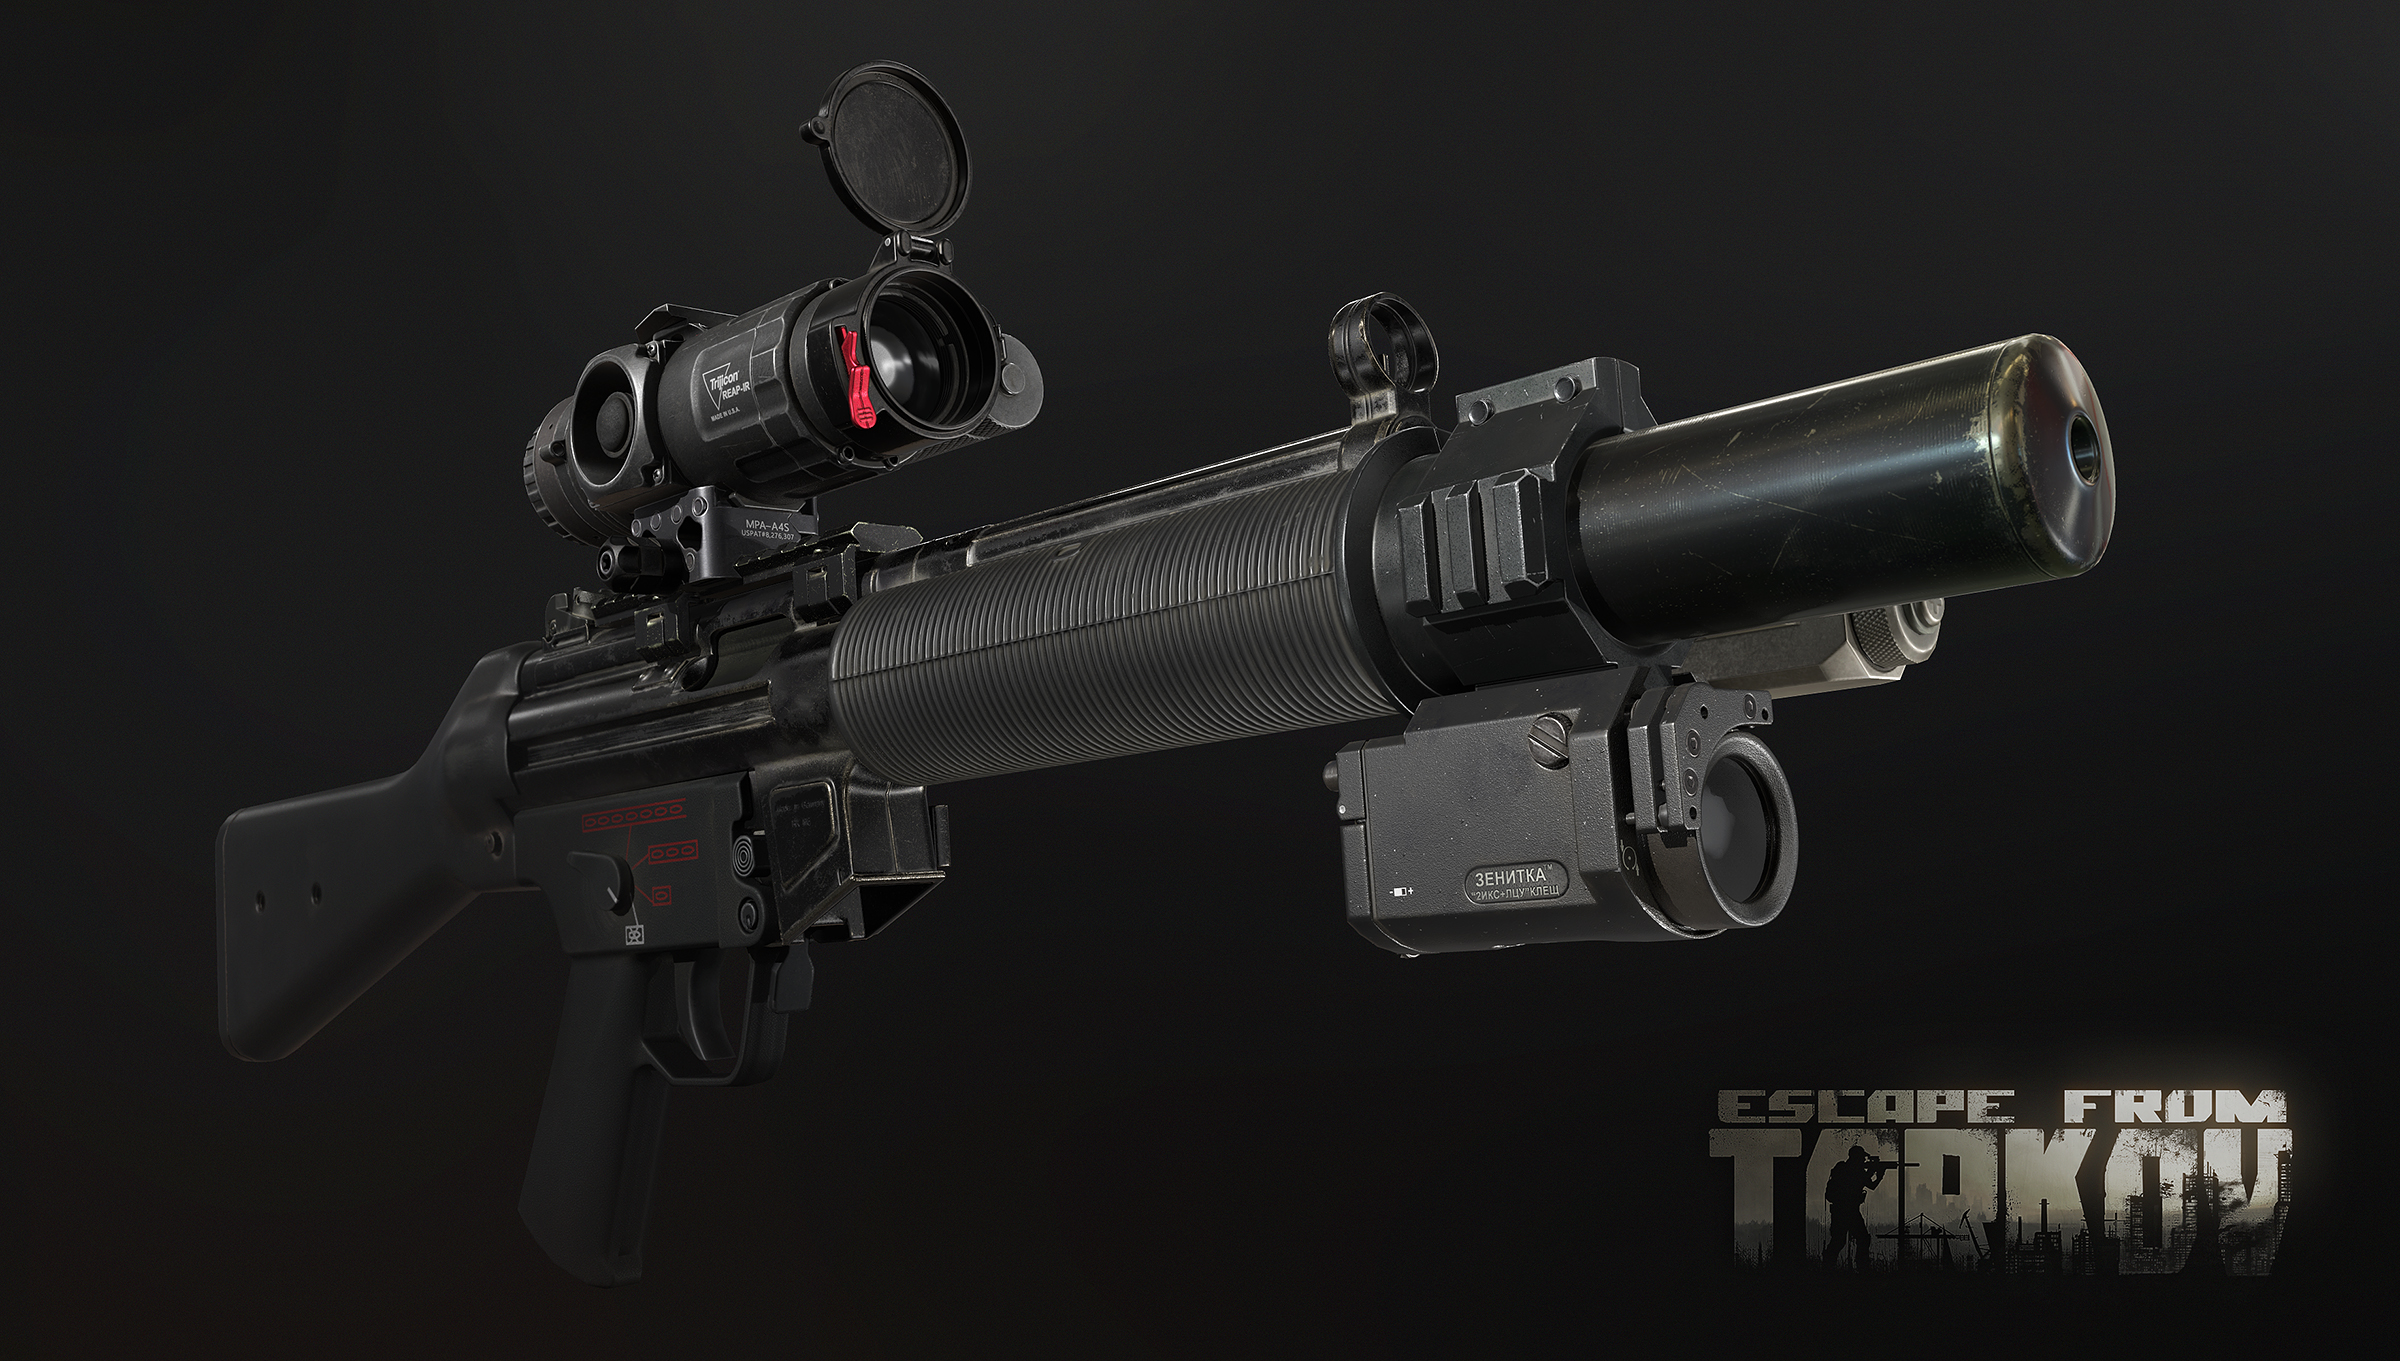 Escape from Tarkov Screenshots of HK MP5 SMG and its variants in Escape from Tarkov - 4